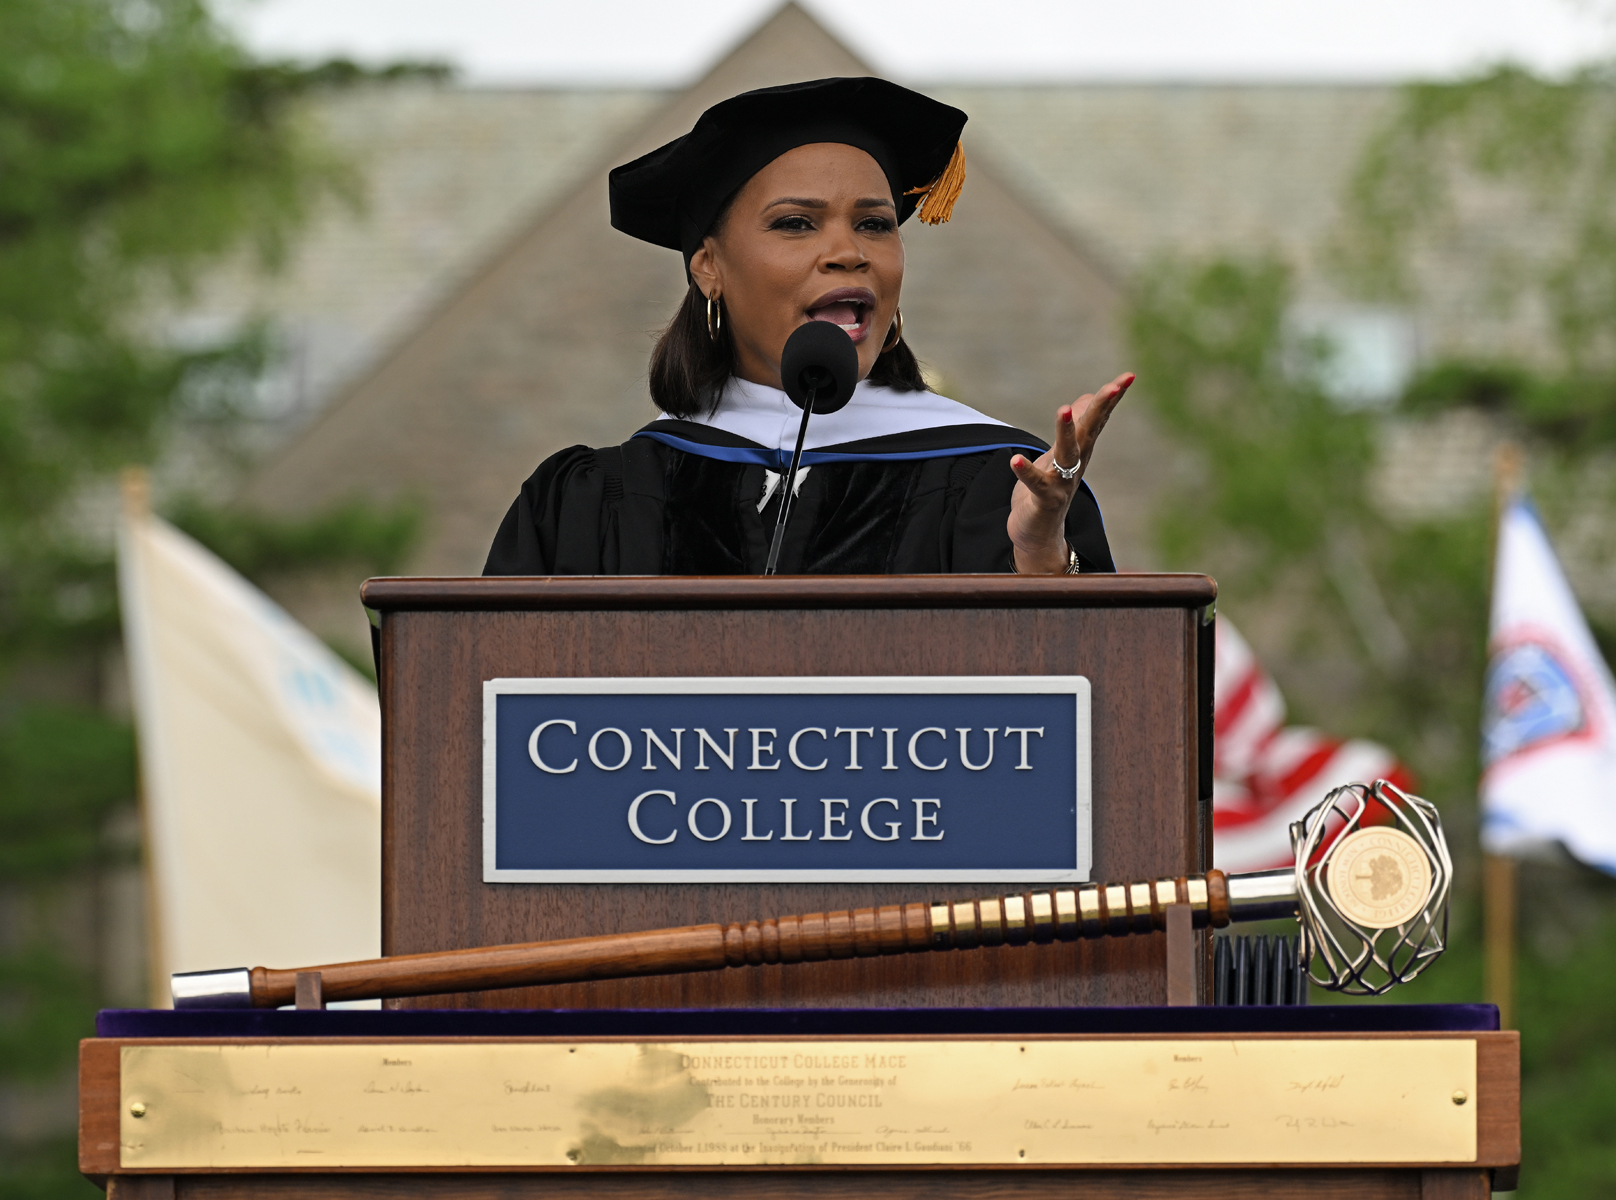 CNN Chief Legal Analyst Laura Coates addresses the Class of 2024 at Connecticut College’s 106th Commencement.